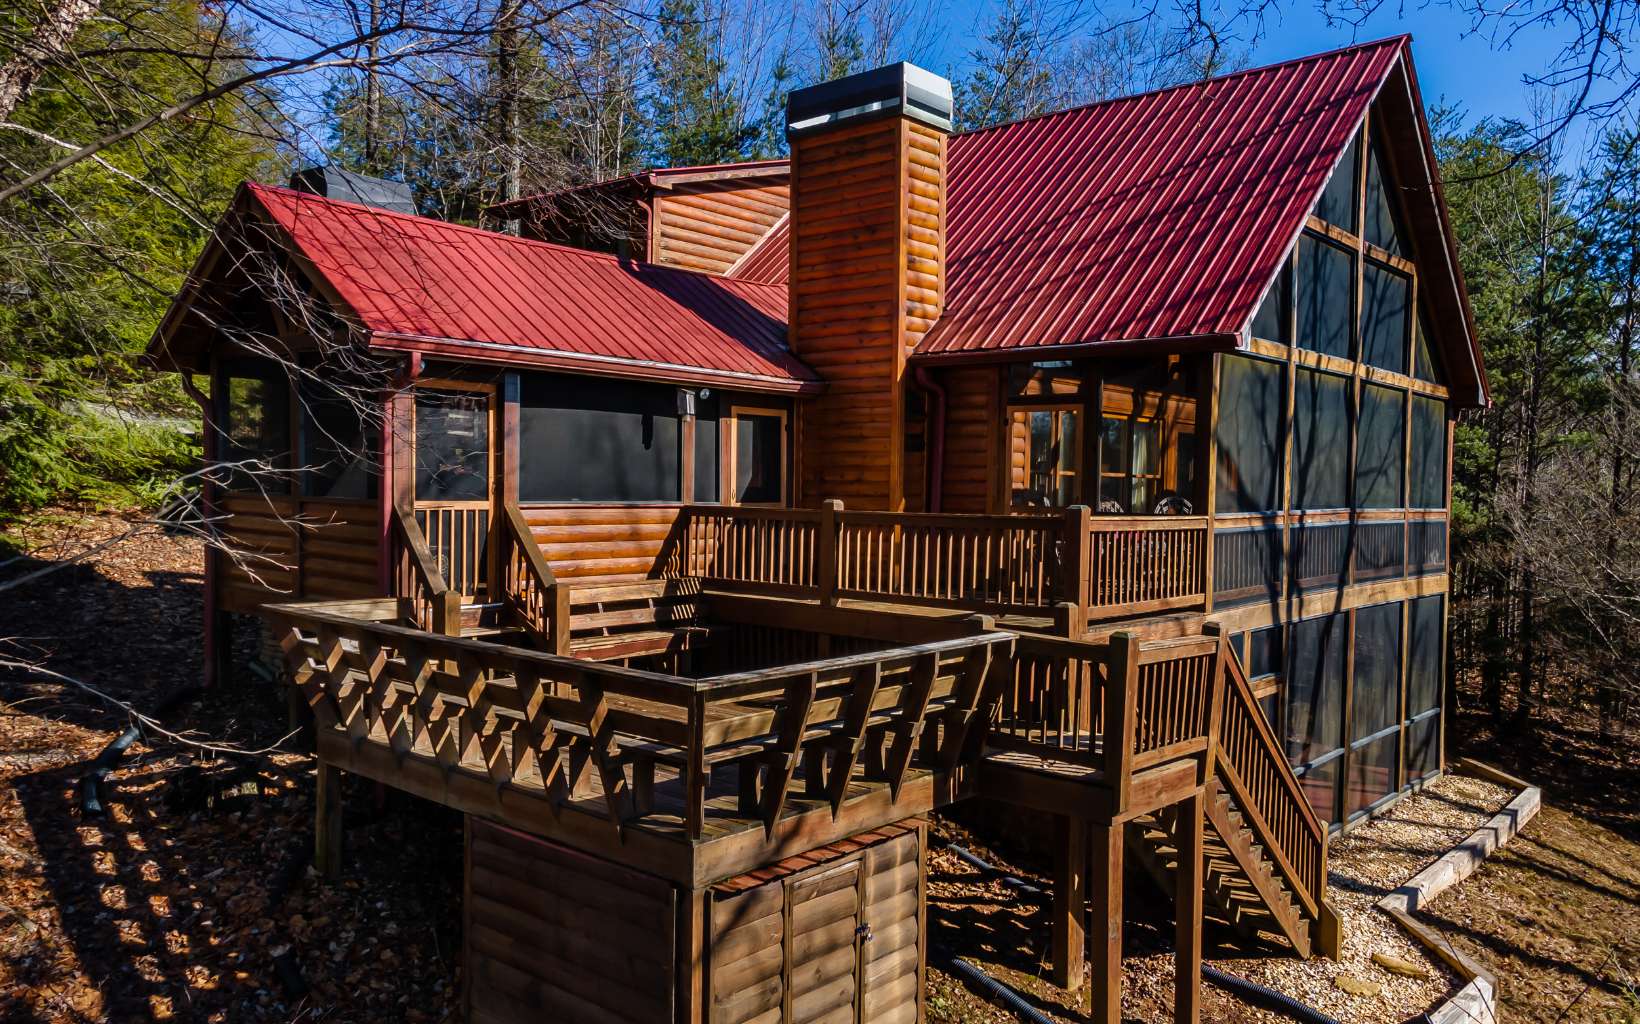 High Elevation Mountain Adventure Outpost! 300 ft. from 36,000 acres of Cohutta National Forest to hike the Benton MacKaye from your door. This is the end of the line, an enclave of only 3 cabins on top of this ridge but only 25 min to Blue Ridge and Ellijay. 3BR/3BA w/ open living/dining/kitchen centered on the HUGE WALL OF GLASS & EXCEPTIONAL LONG RANGE MOUNTAIN VIEWS. Full finished terrace level w/ BR/BA & game room. Built for the outdoors, full-length view side screened porch, Outdoor screened-in living room w/ natural slate floor, beams & a stacked stone wood burning fireplace. No drive-by traffic (no dust), 3+AC of land, and end-of-the-road privacy. Some furniture is negotiable. New HVAC and 12000 KW Generator. Previous buyers financing fell though and terminated contract.